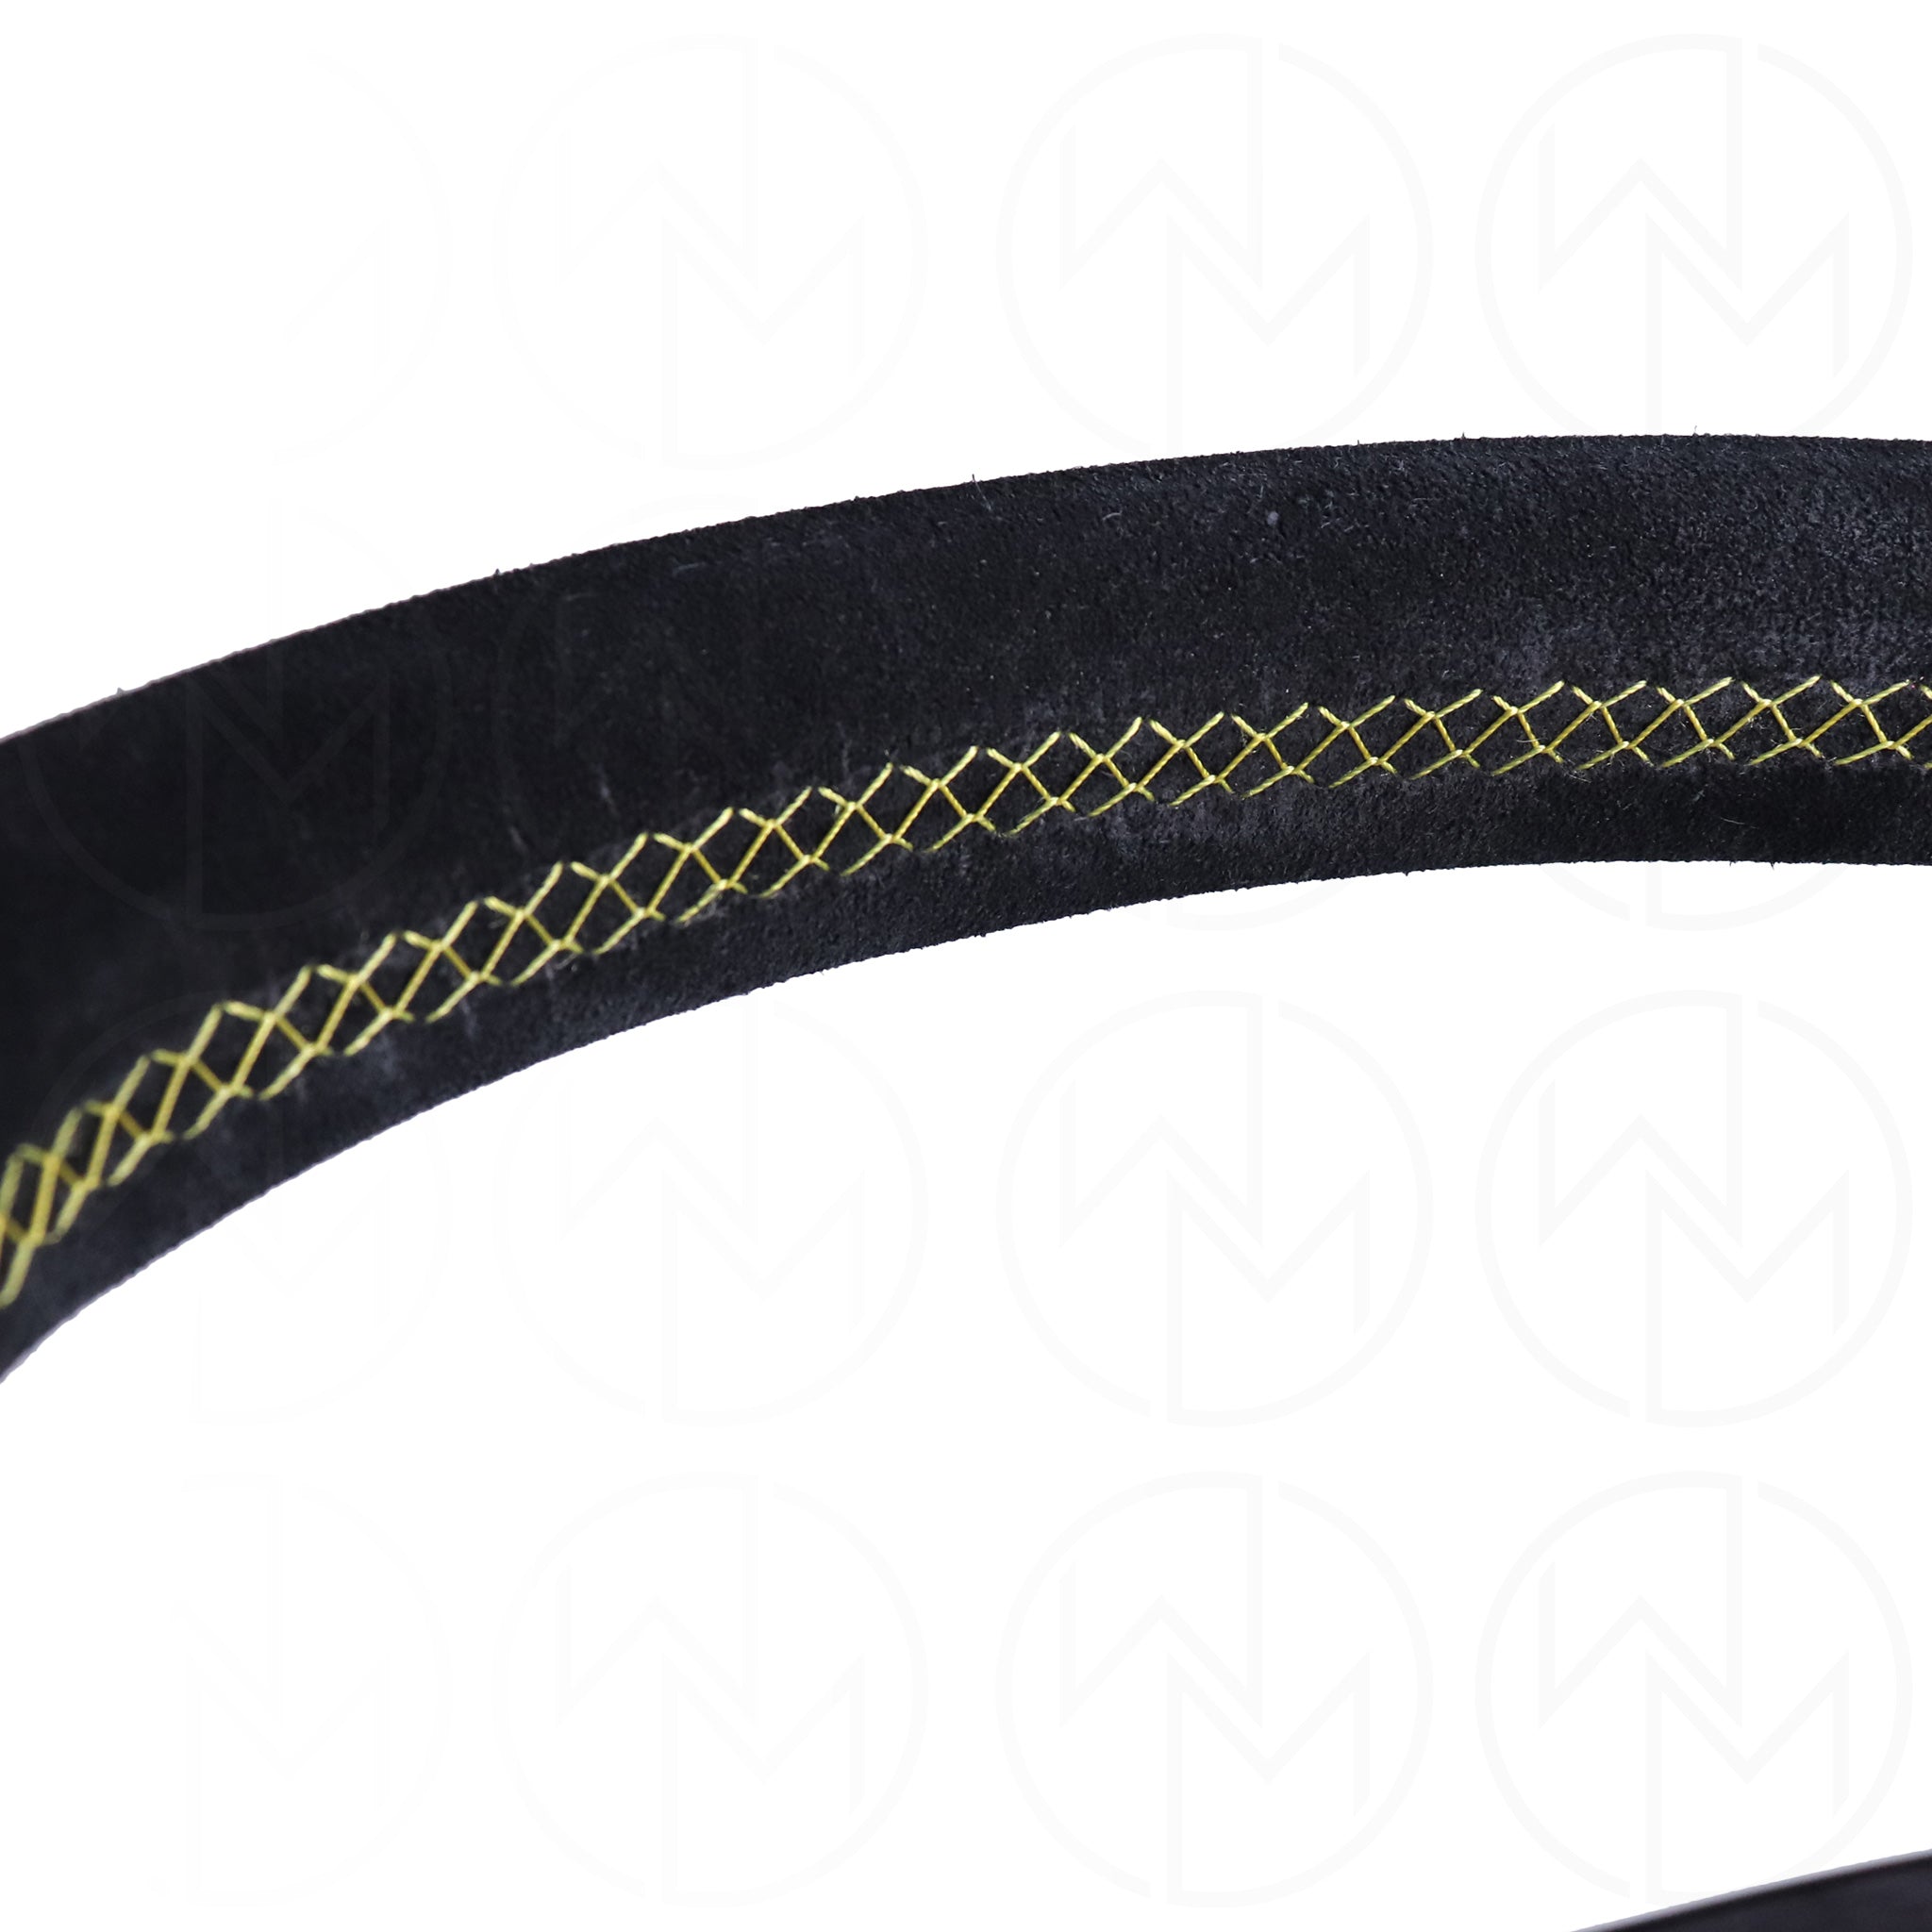 Personal Grinta Steering Wheel - 330mm Suede w/Yellow Stitch